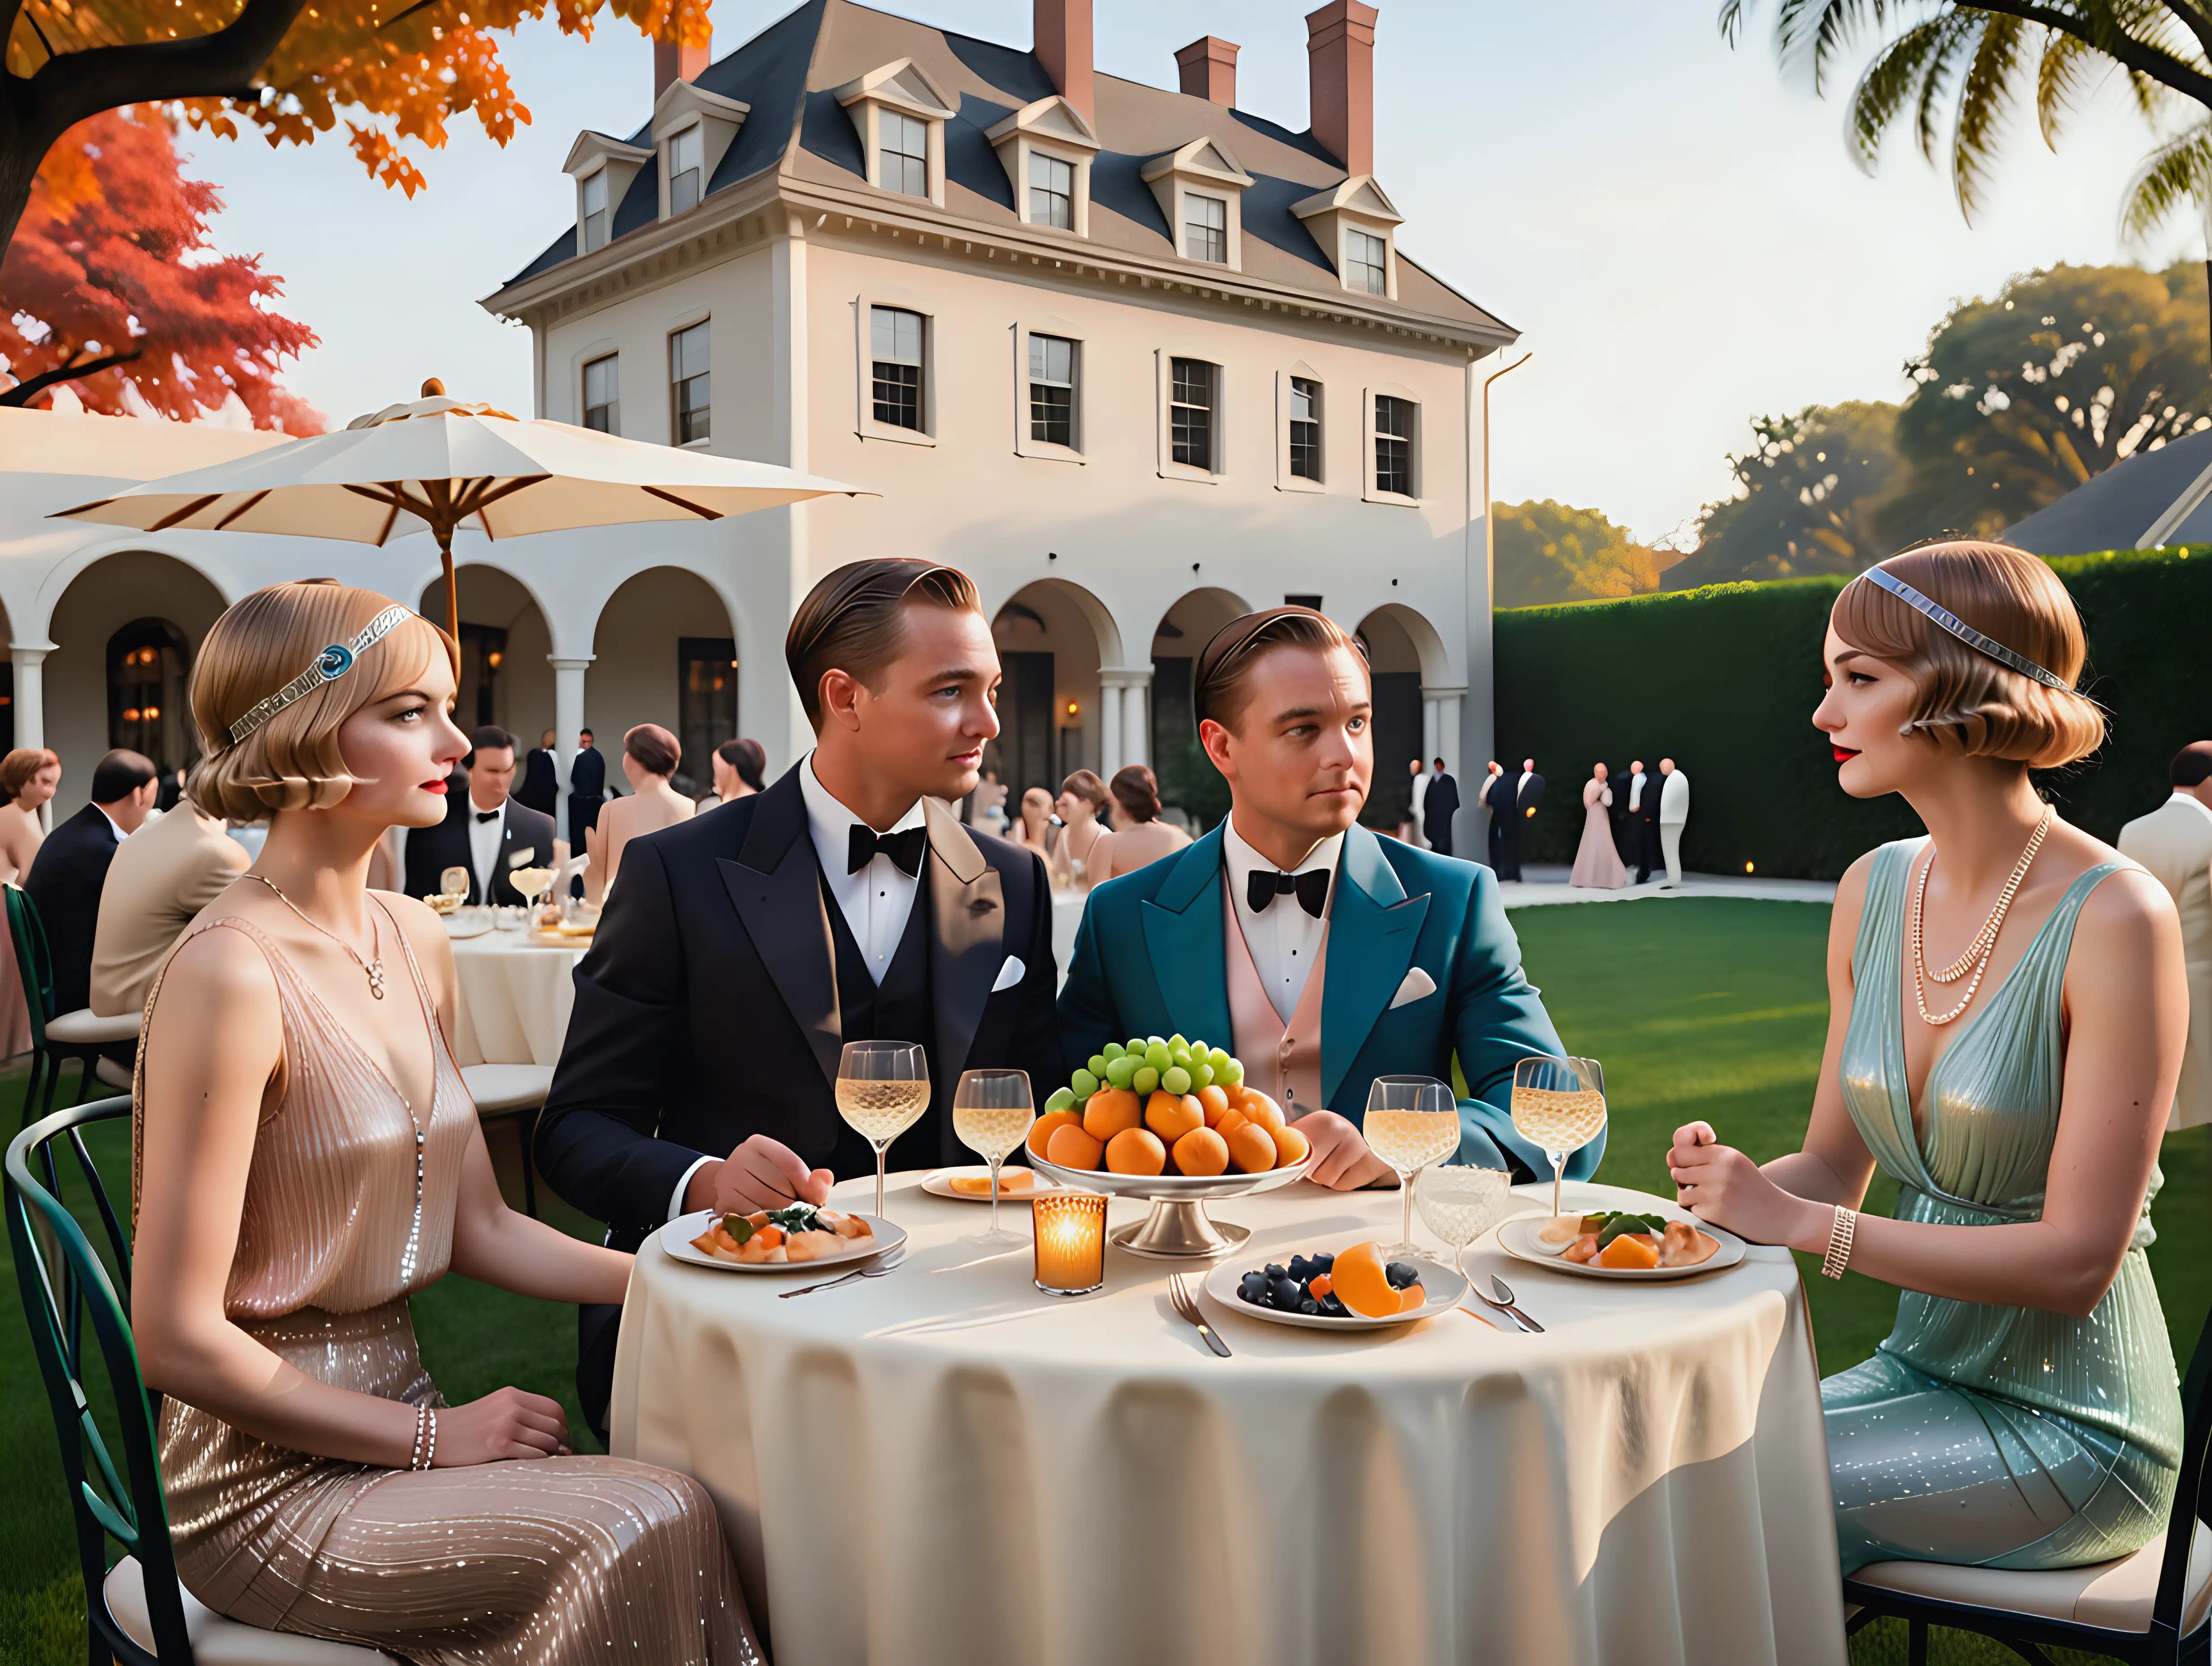 great Gatsby outdoor  dinner  small round table  2  men and 2 women Maison in background